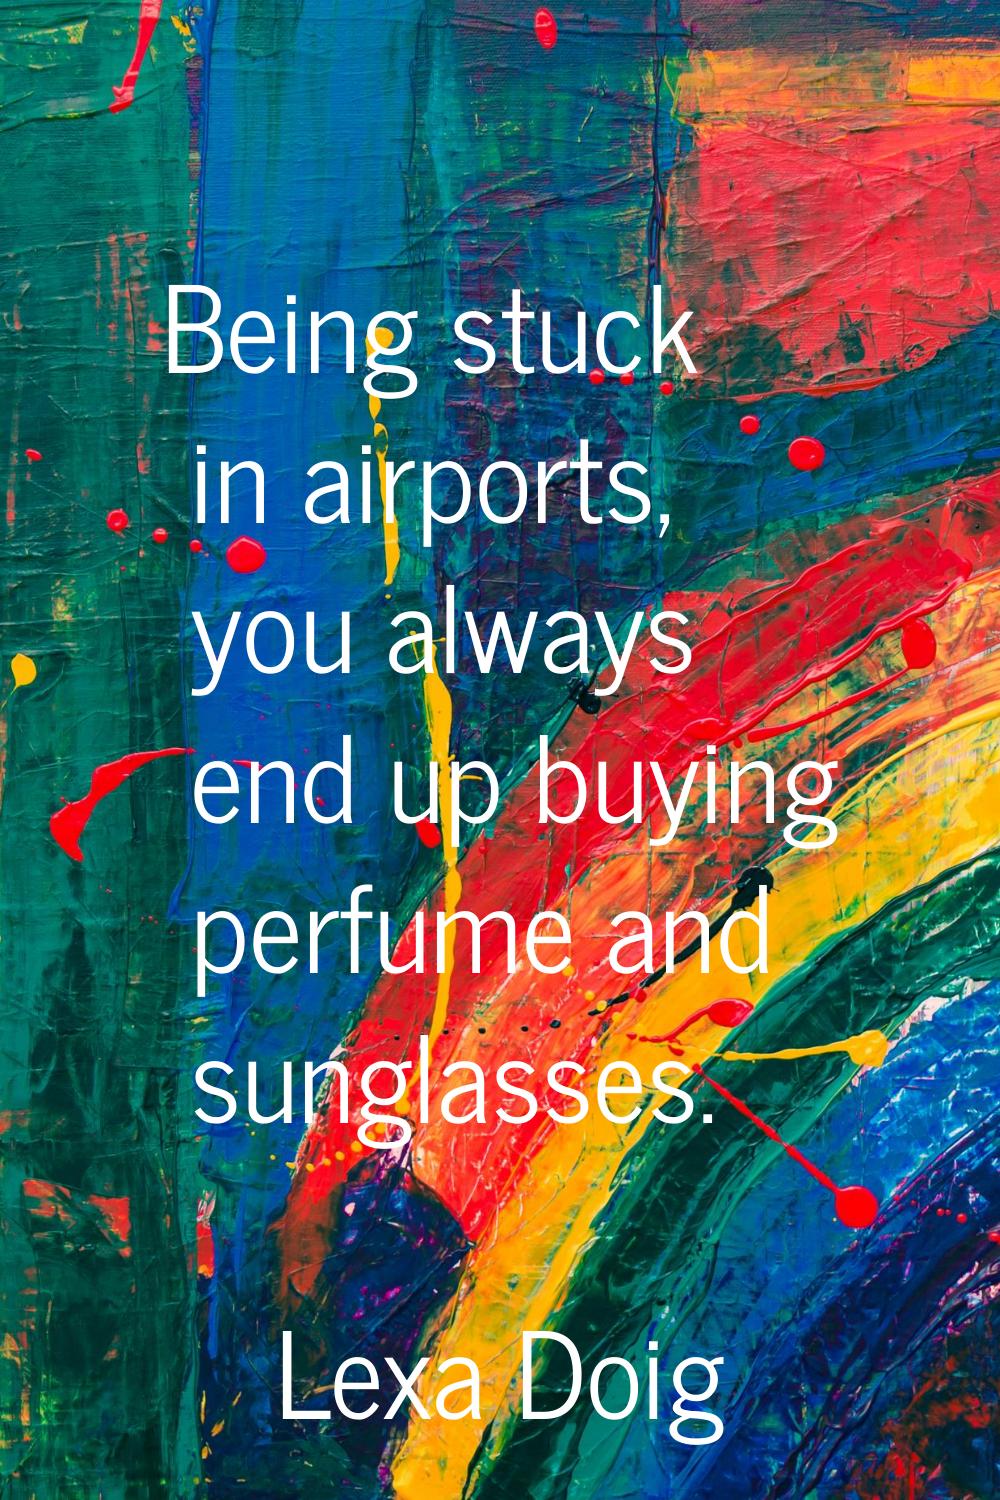 Being stuck in airports, you always end up buying perfume and sunglasses.